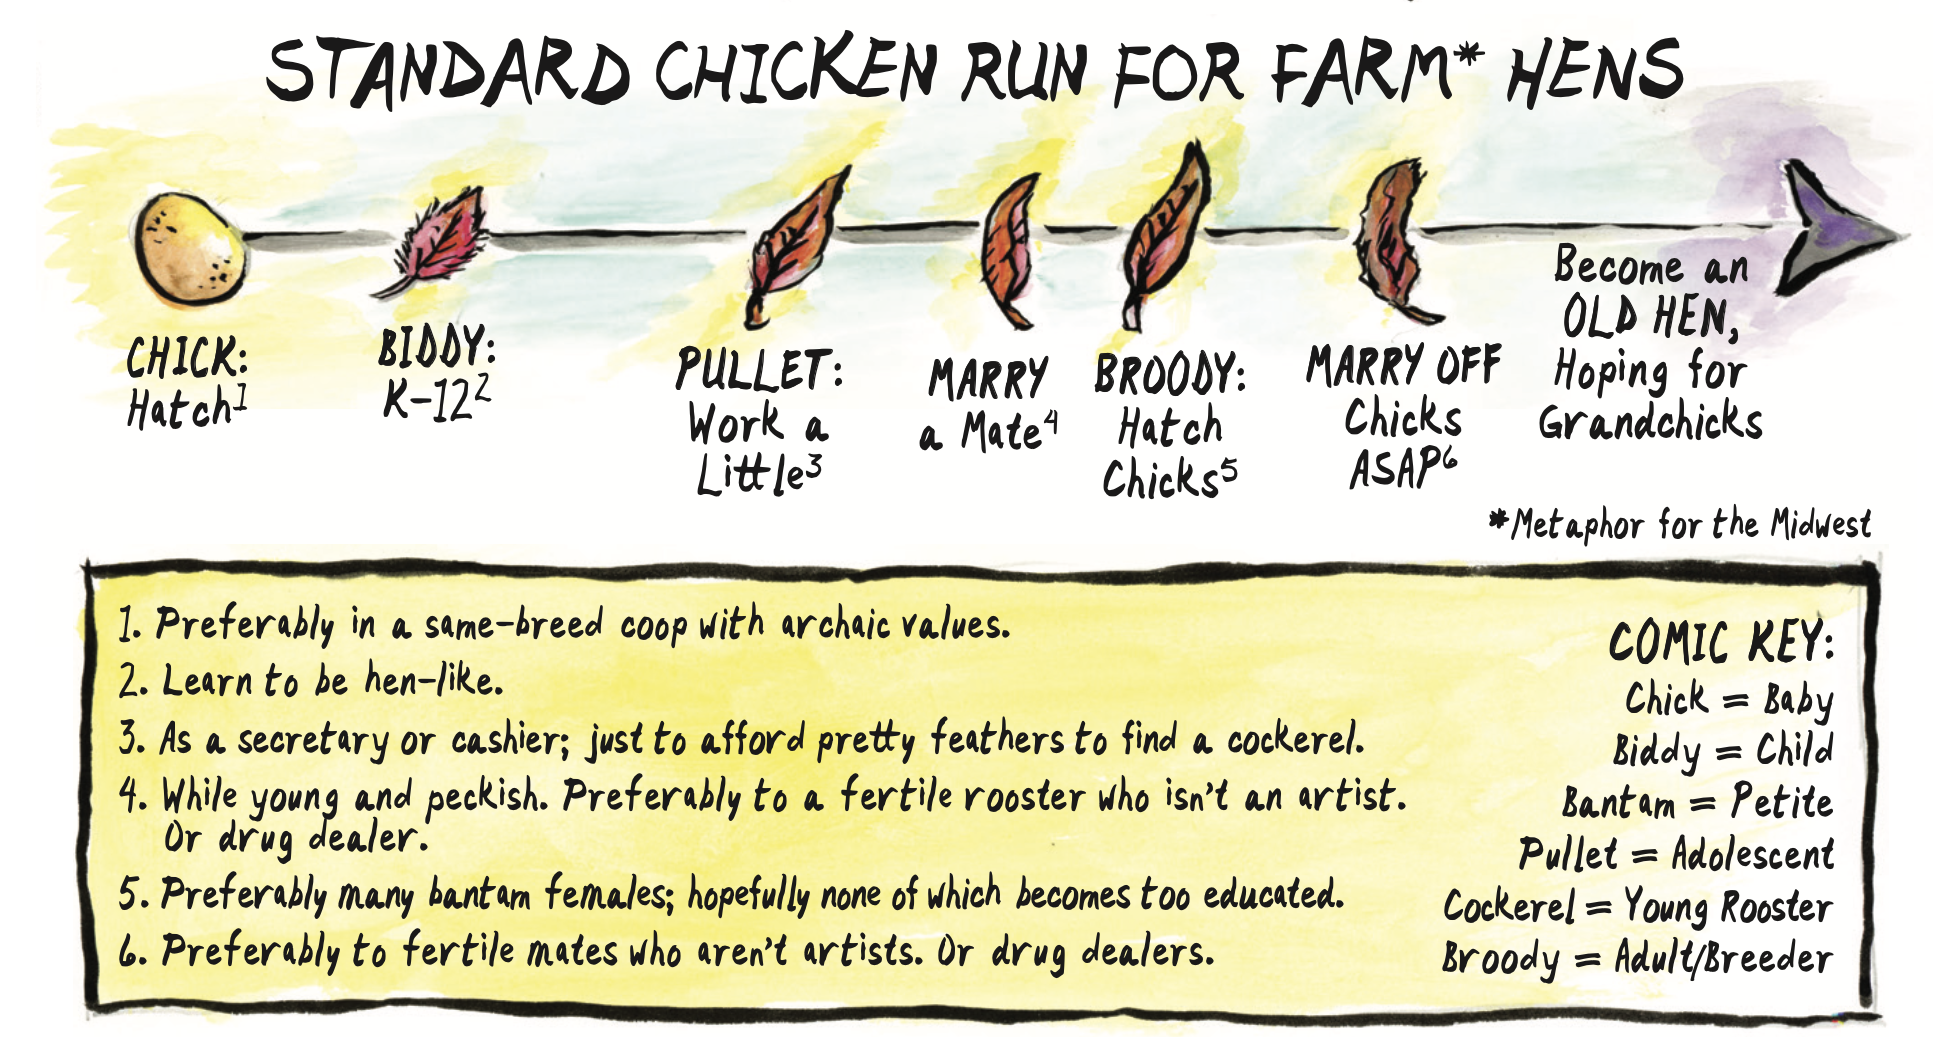 A timeline chart with footnotes explaining each point, labeled with the following text: â€œStandard chicken run for farm* (*metaphor for the Midwest) hens: Chick: Hatch (1. Preferably in a same-breed coop with archaic values.) Biddy: K-12 (2. Learn to be hen-like.â€ Pullet: Work a little (3. As a secretary or cashier; just to afford pretty feathers to find a cockerel.) Marry a mate (4. While young and peckish. Preferably to a fertile rooster who isnâ€™t an artist. Or drug dealer.) Broody: Hatch chicks (5. Preferably many bantam females; hopefully none of which becomes too educated.) Marry off chicks ASAP (6. Preferably to fertile mates who arenâ€™t artists. Or drug dealers.) Become an old hen, hoping for grand chicks. Comic key: Chick = baby Biddy = child Bantam = petite Pullet = adolescent Cockerel = young rooster Broody = adult/breederâ€